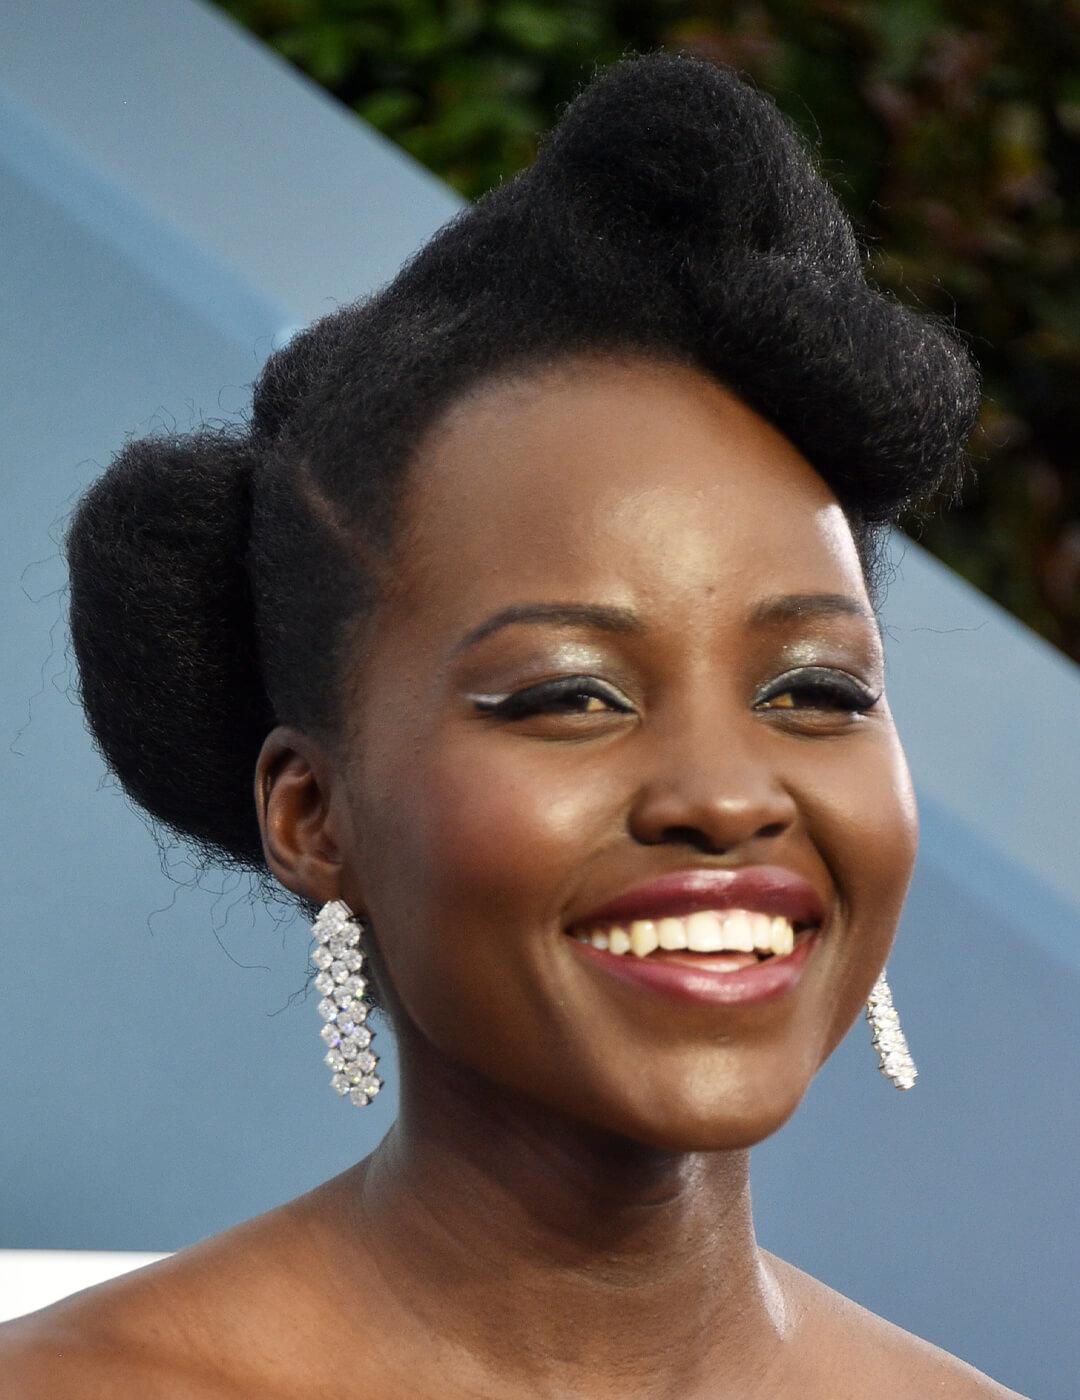 Lupita Nyong'o rocking a glamorous look paired with an updo hairstyle